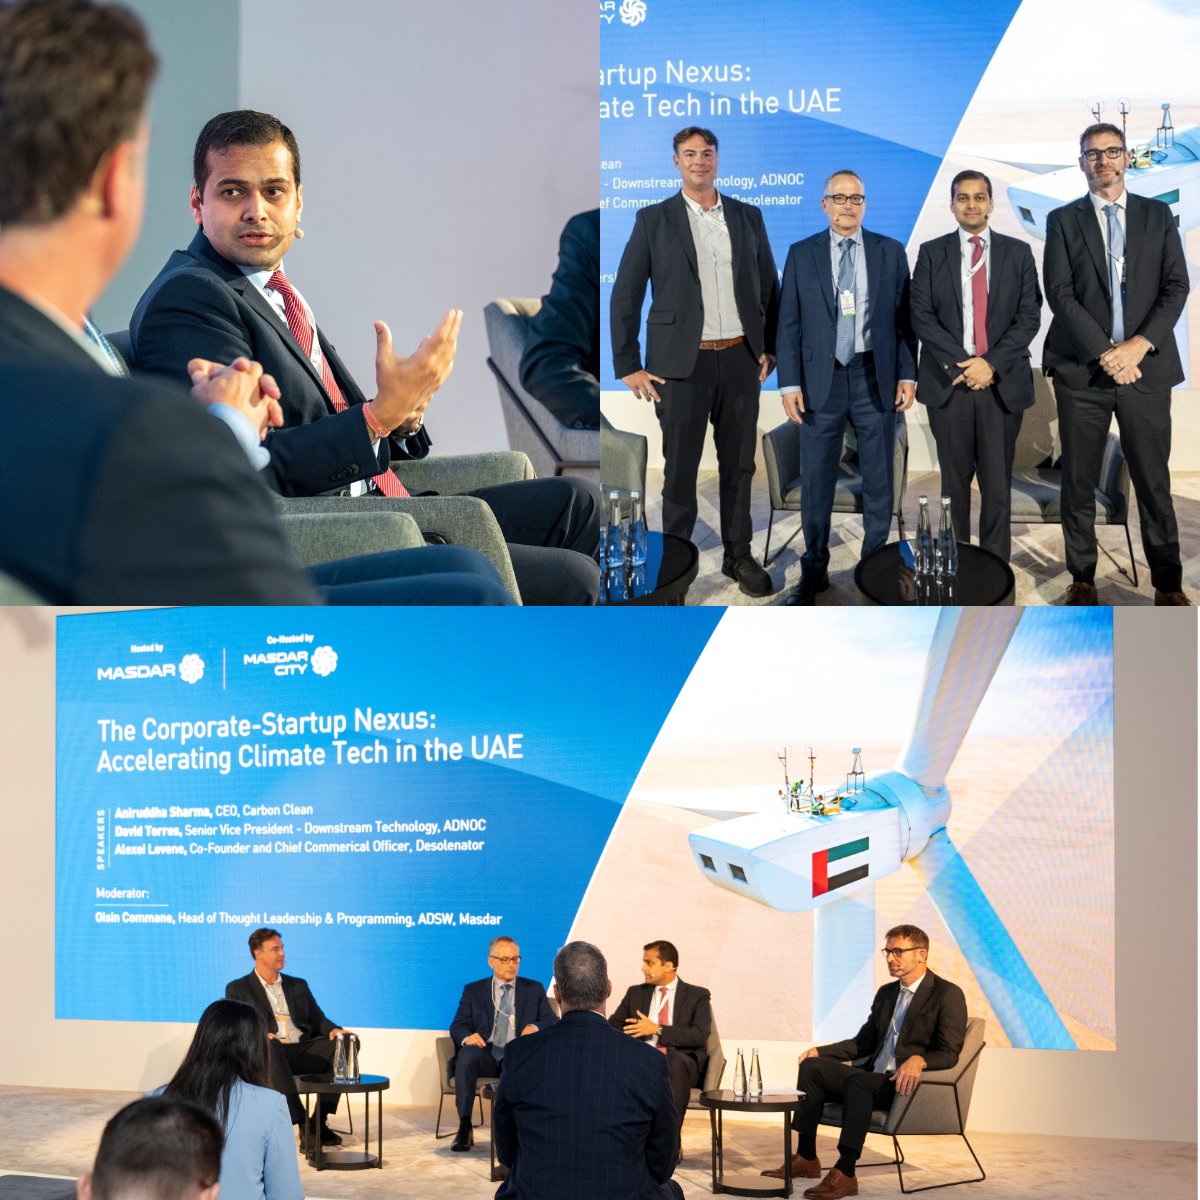 It was a pleasure to join @ADNOCGroup and @desolenator in last week's panel on accelerating climate tech in the #UAE at the @WFES summit hosted by @Masdar.
 
ADNOC’s partnership approach is a great model to deliver FOAK demonstrations like ours to accelerate climate tech.